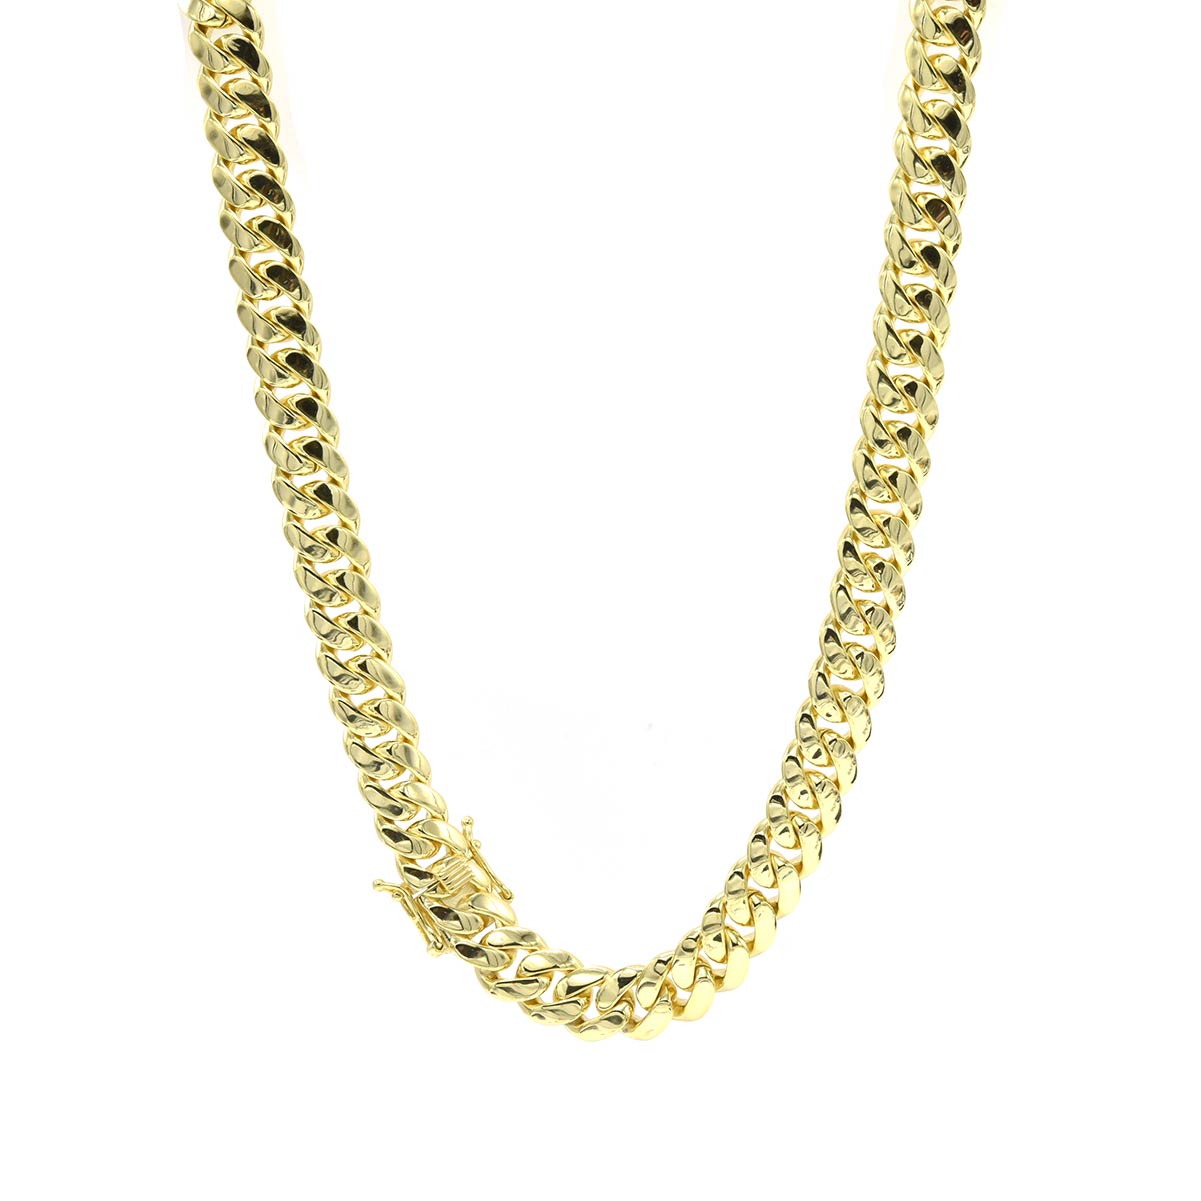 STNB-09 925 Silver Plain Cuban Chain 8mm 18" 20" 22" 24" 7" 7.5" 8" Price by Weight